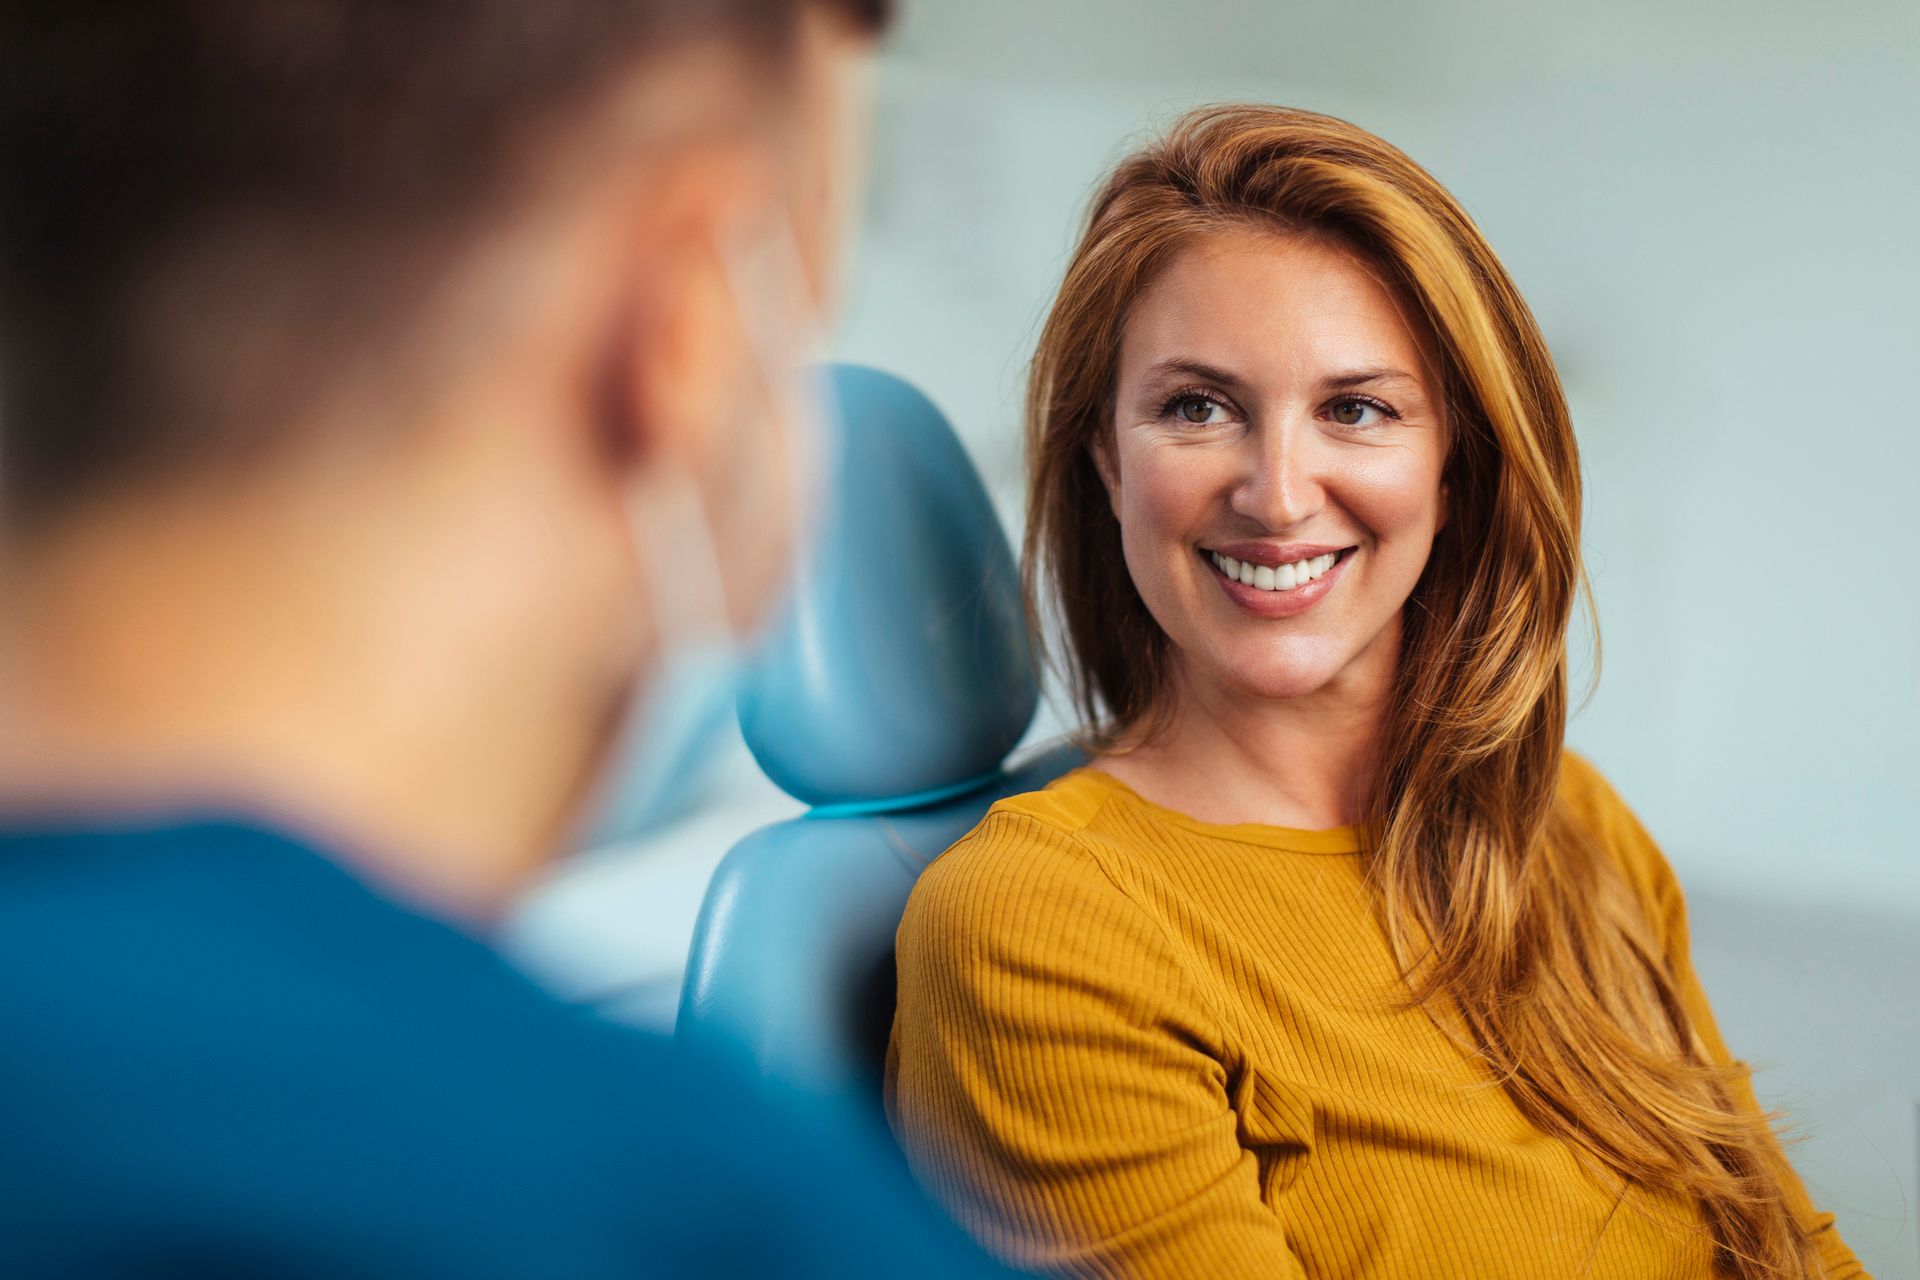 A woman is smiling while sitting in a dental chair talking to a dentist.